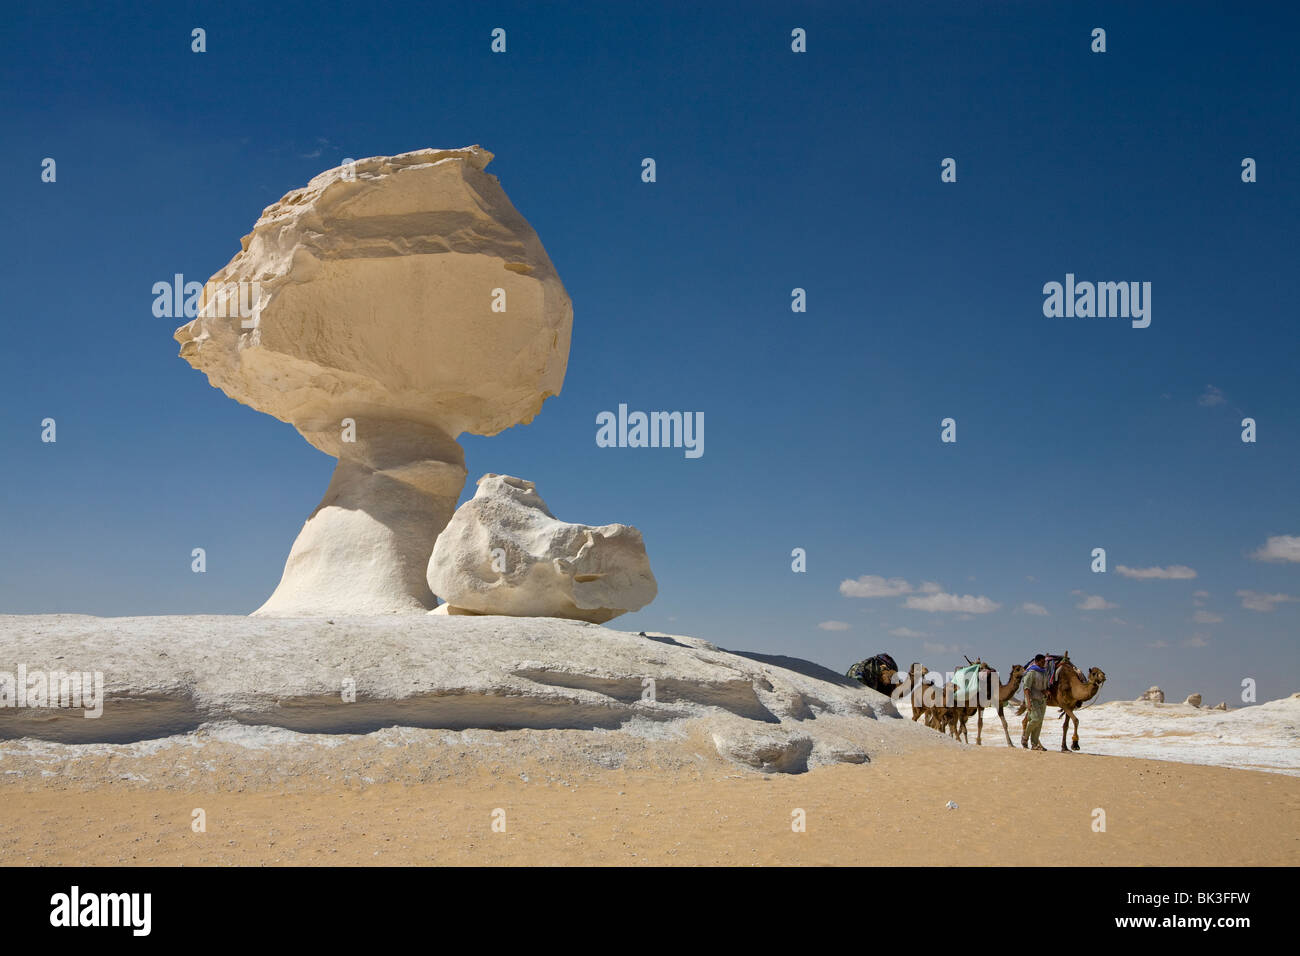 Camels walking close to the sculptural rock forms against a blue sky. The White Desert  near Farafra Oasis, Egypt. Stock Photo